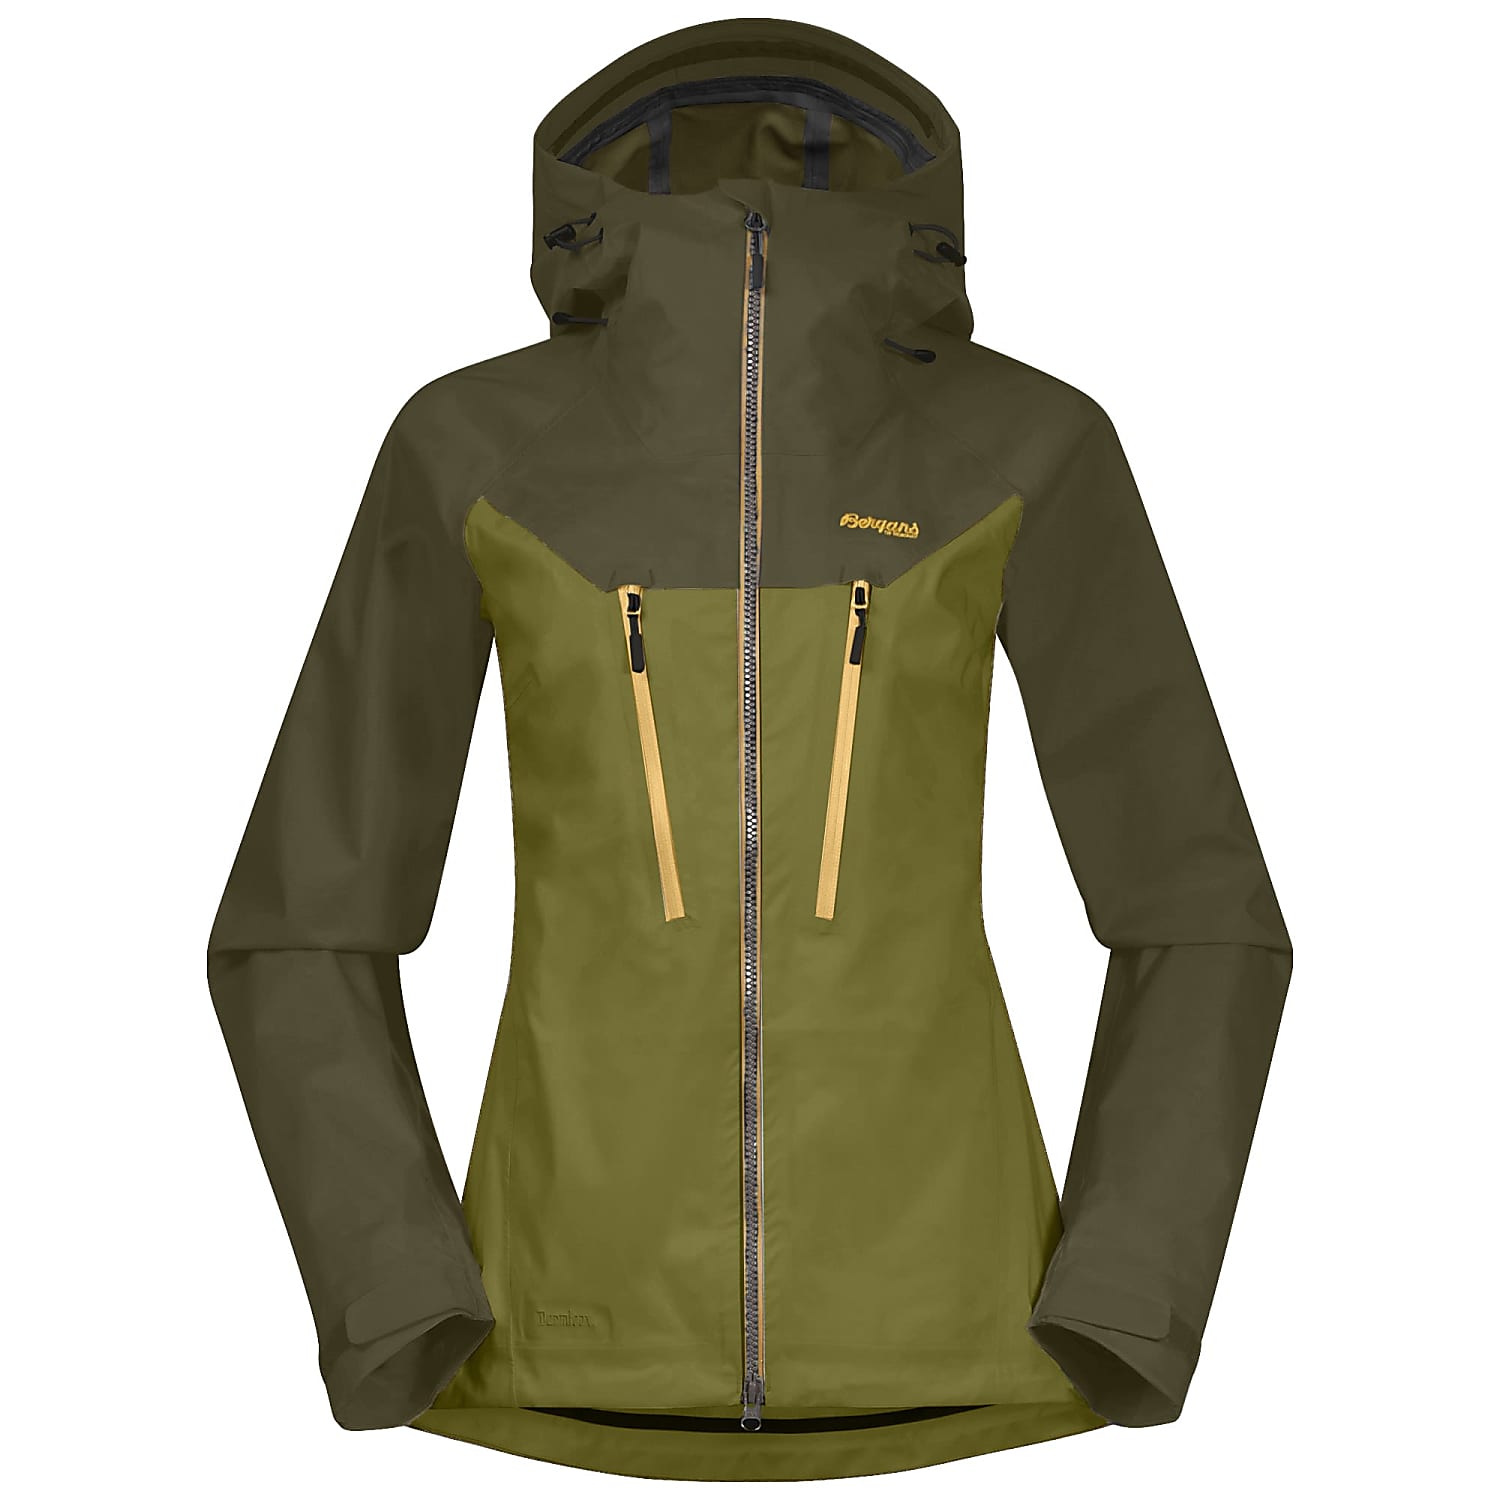 Bergans CECILIE 3L JACKET, Trail Green - Olive Green - Fast cheap shipping www.exxpozed.com